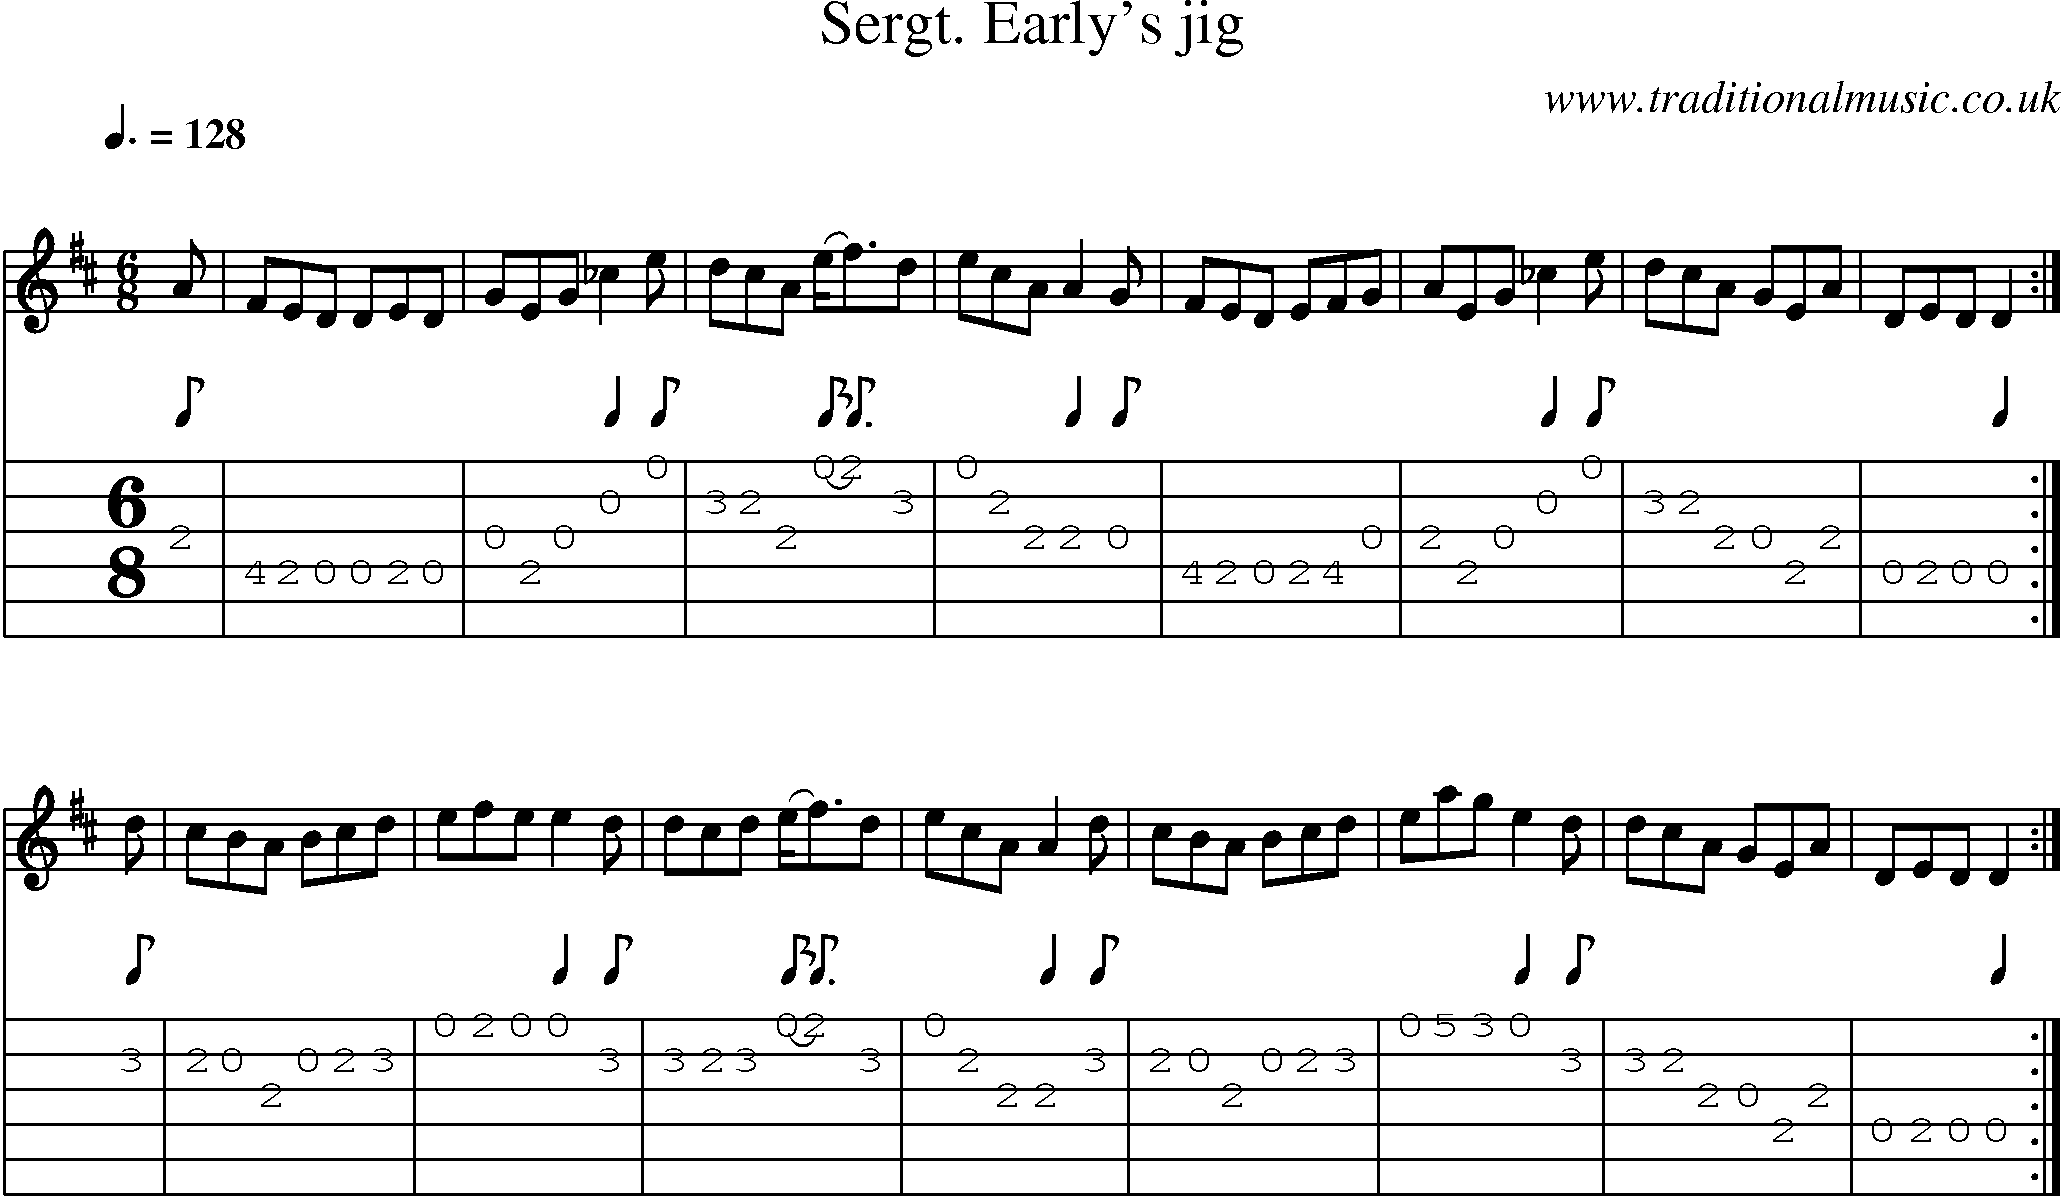 Music Score and Guitar Tabs for Sergt Earlys Jig